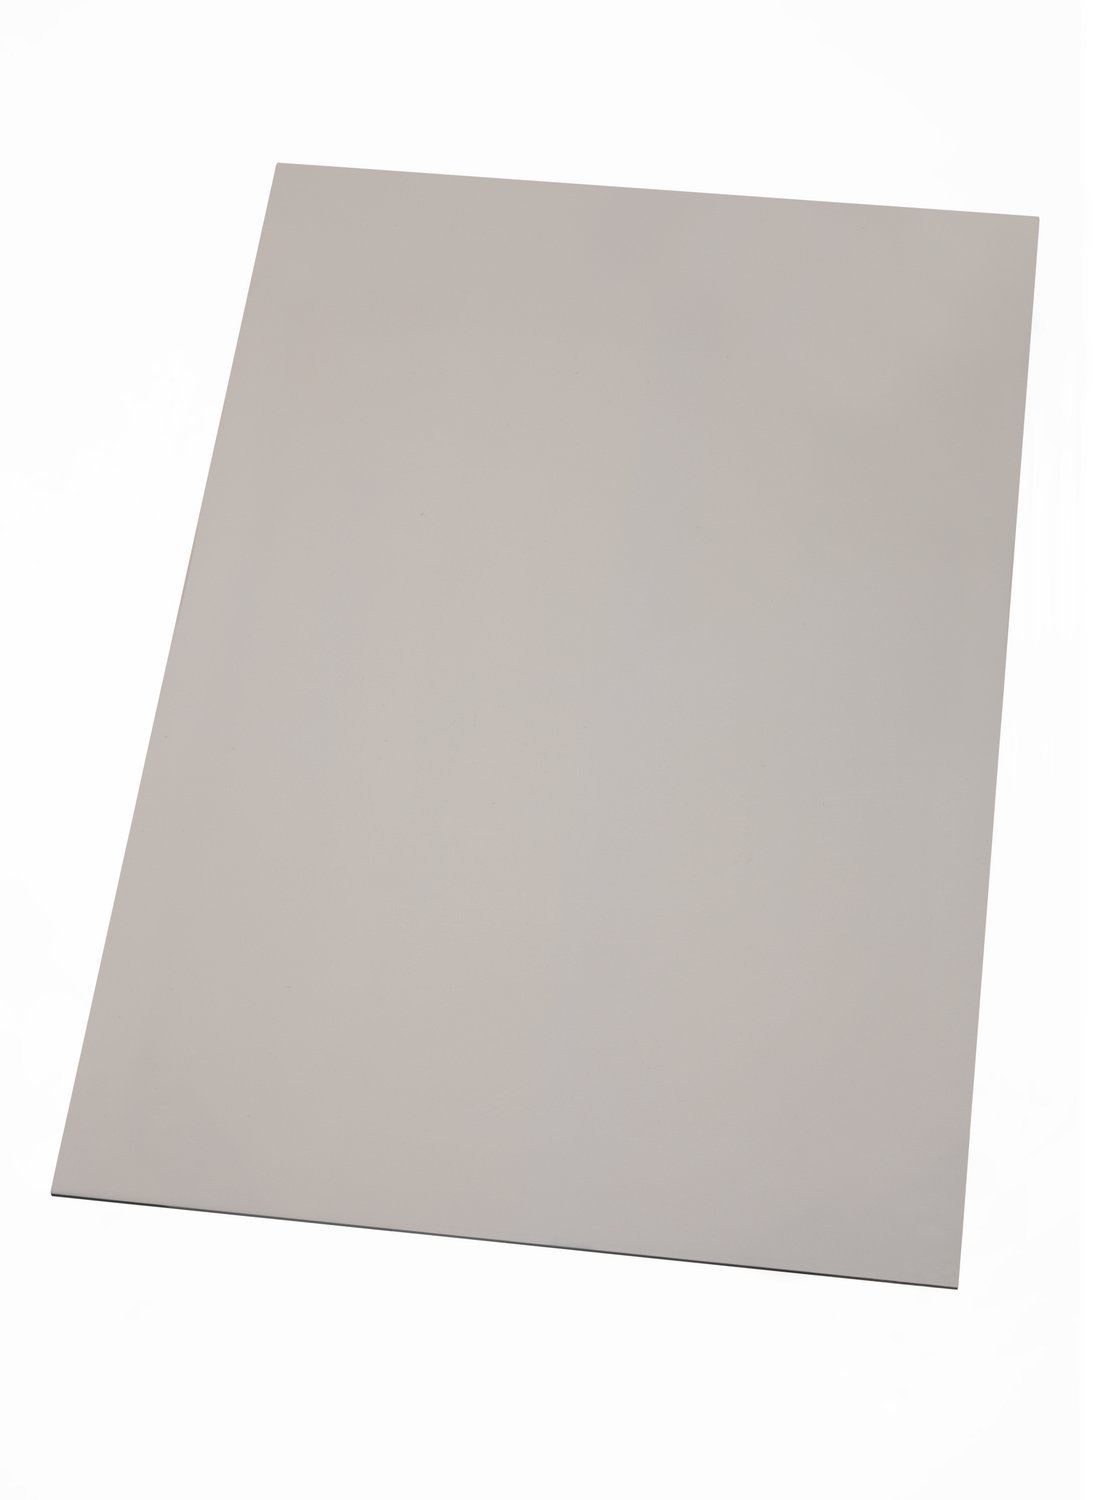 7000100771 - 3M Thermally Conductive Acrylic Interface Pad 5571-10, 300mm x 20m,
1/Case